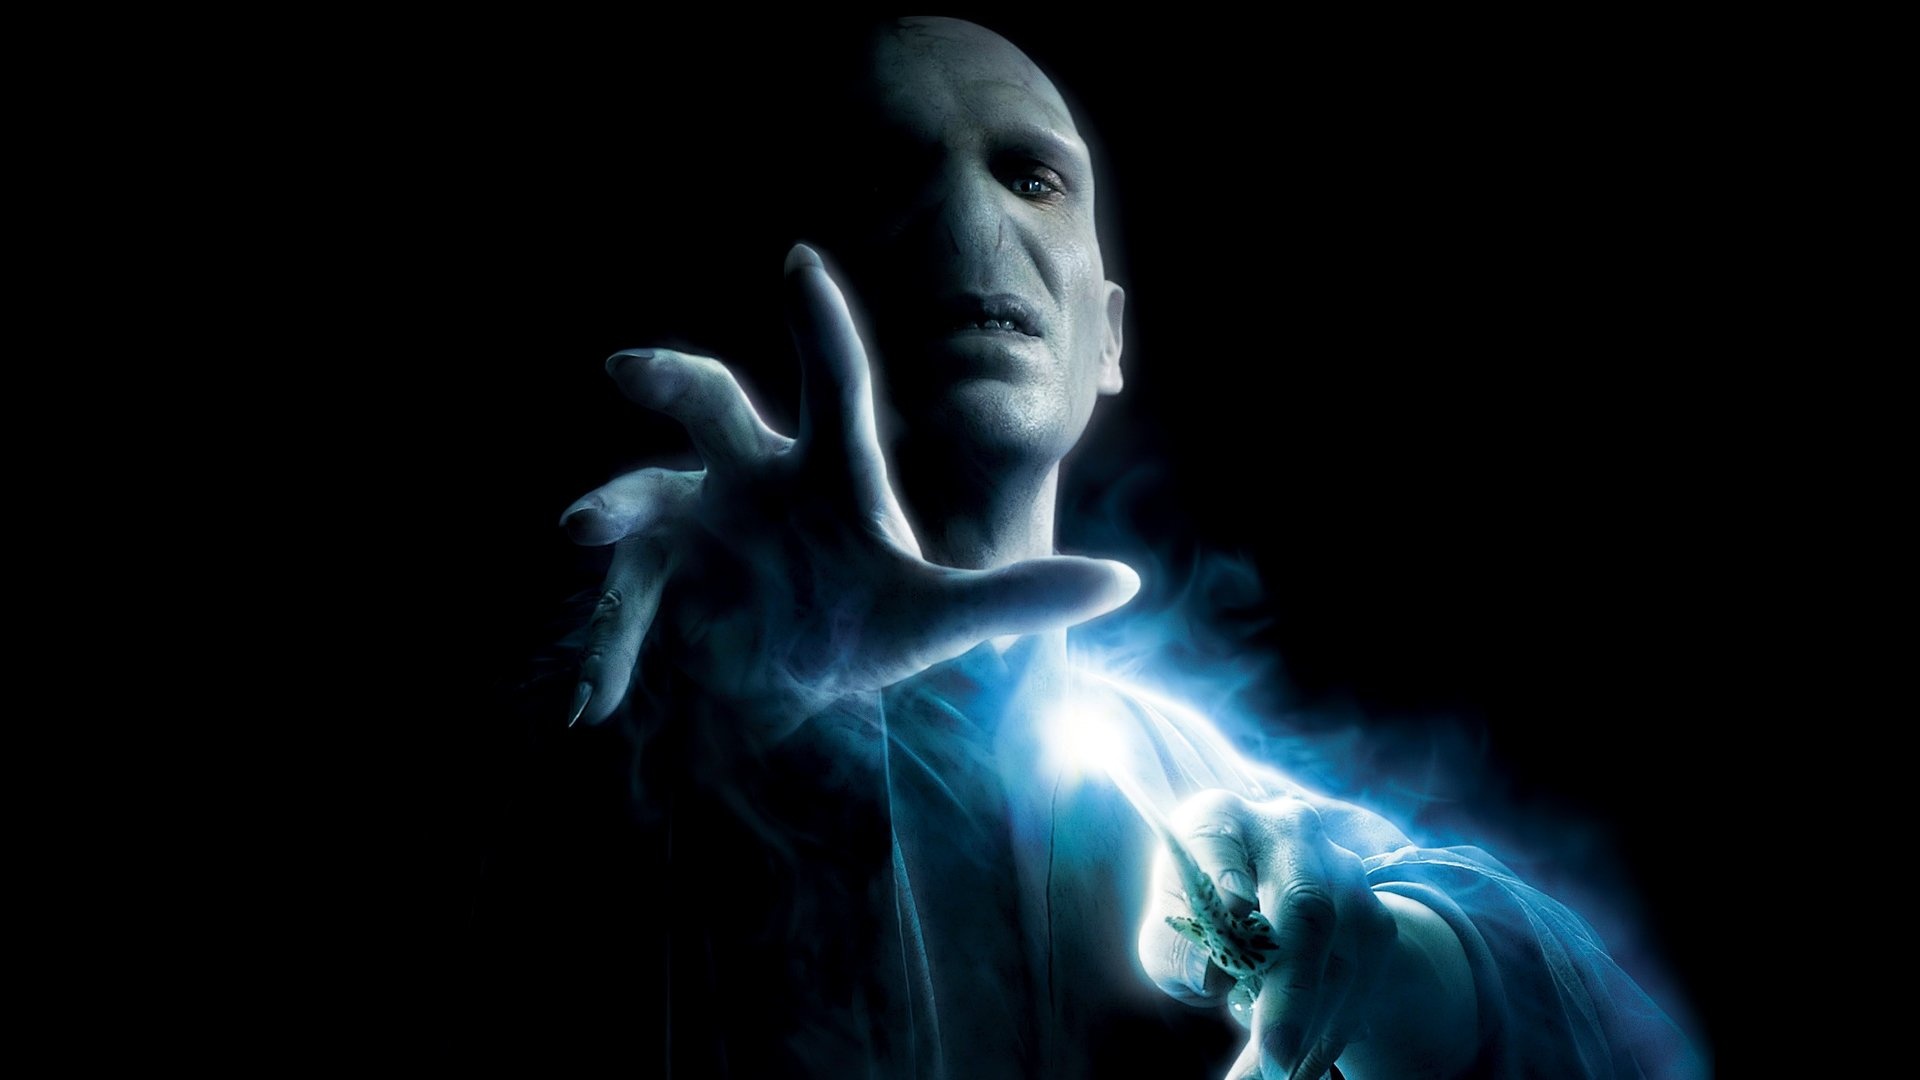 HD wallpaper, Lord Voldemort, Desktop Full Hd Lord Voldemort Background, 1920X1080 Full Hd Desktop, Top Free Backgrounds, Movie Character